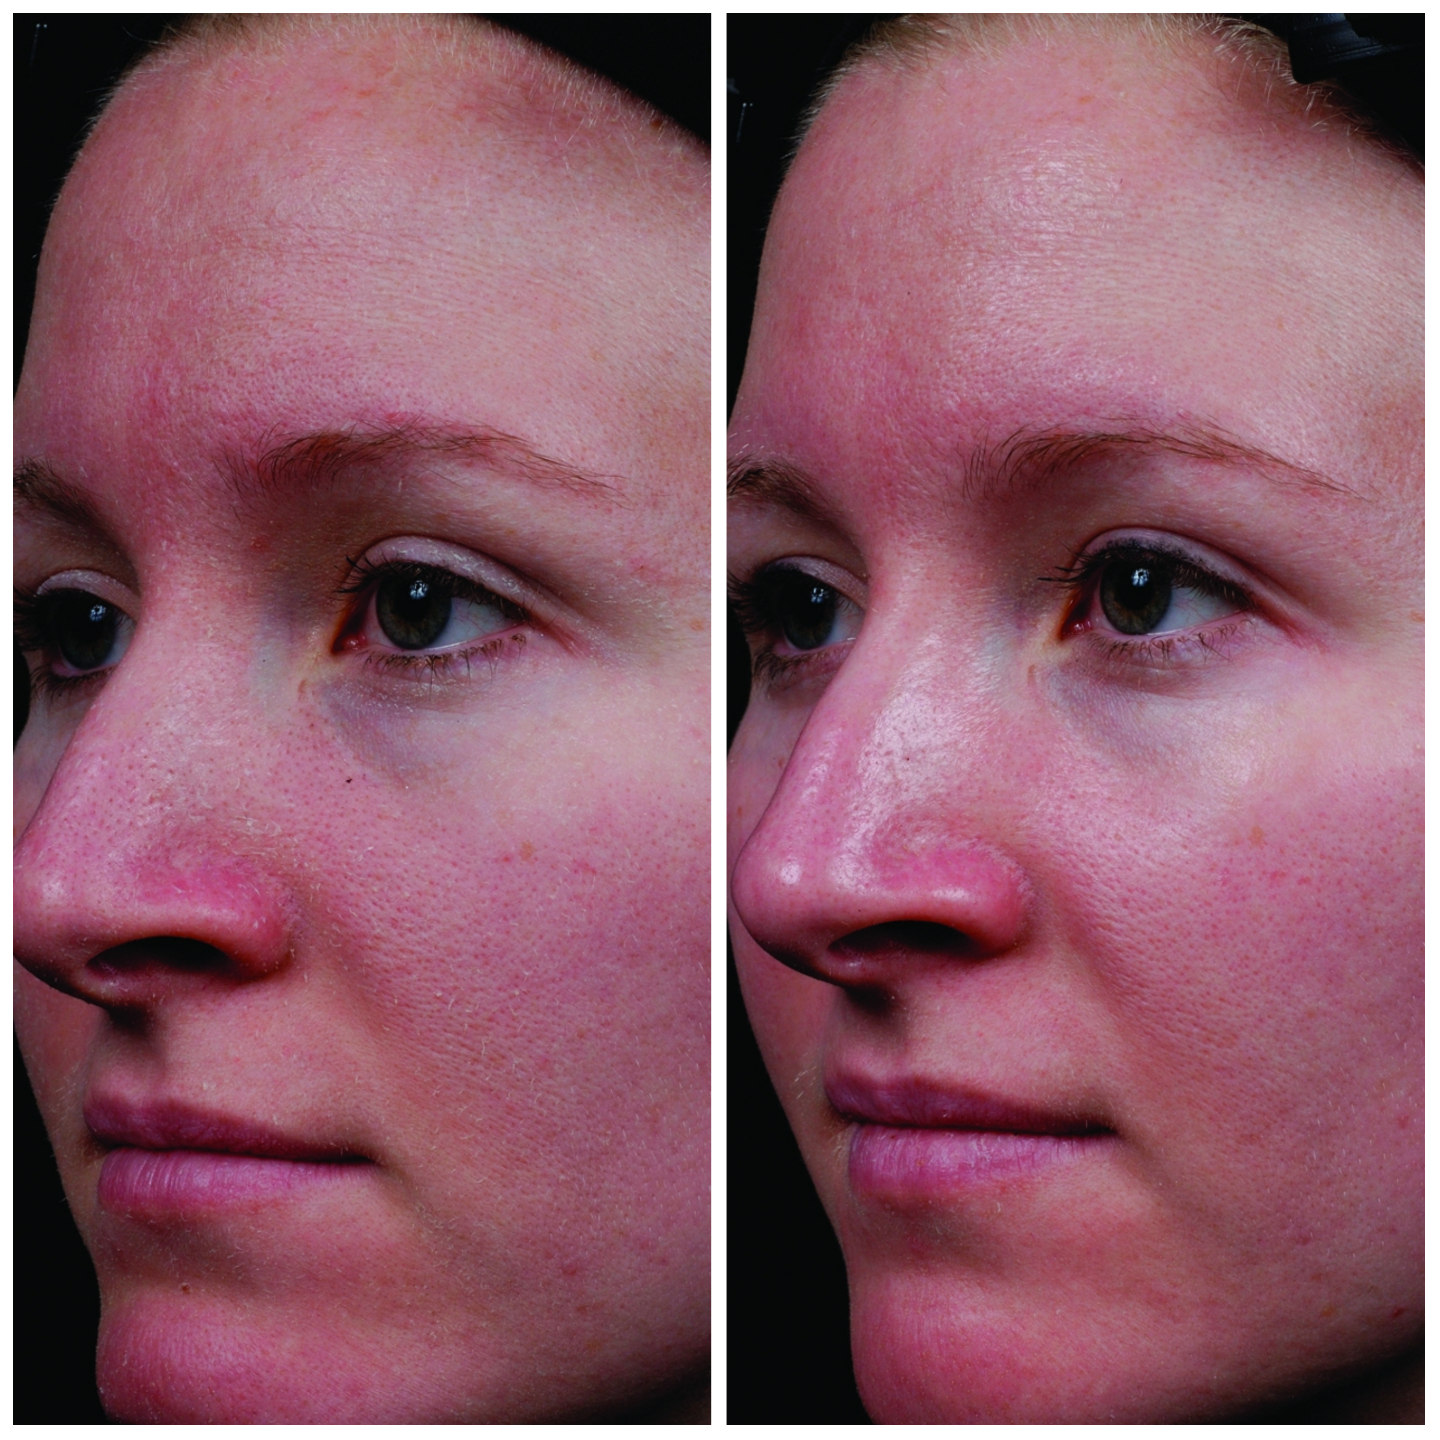 A participant before trying the serum layered with moisturizer (left) and after two weeks of treatment (right)